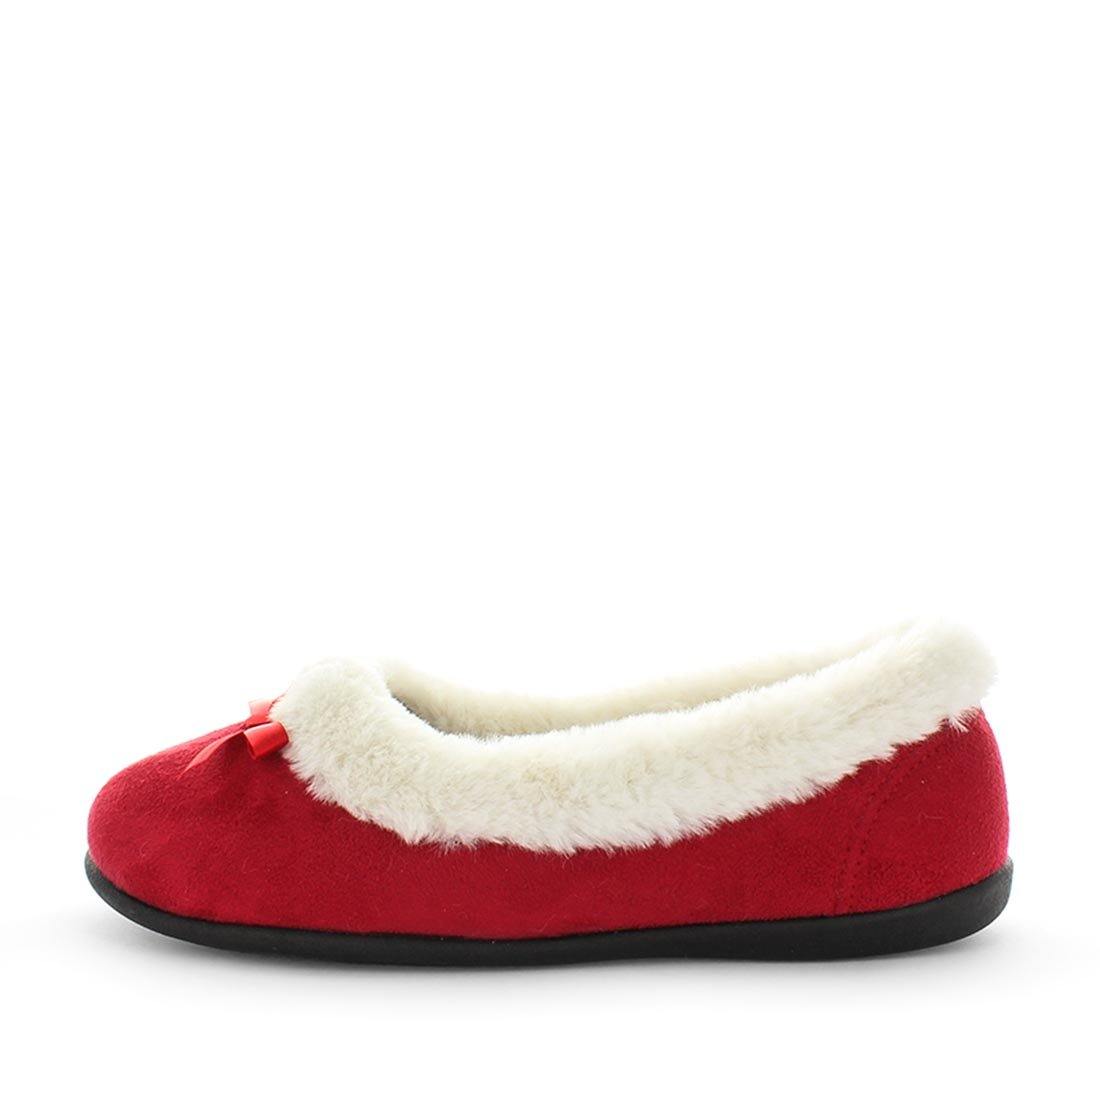 Load image into Gallery viewer, Elmo by panda slippers - womens slippers - memory foam slippers - womens ballet slippers - all year slippers - cute felt ballet slipper by panda slippers with microterry lining, faux fur collar trim and a memory foam sock for extra comfort
